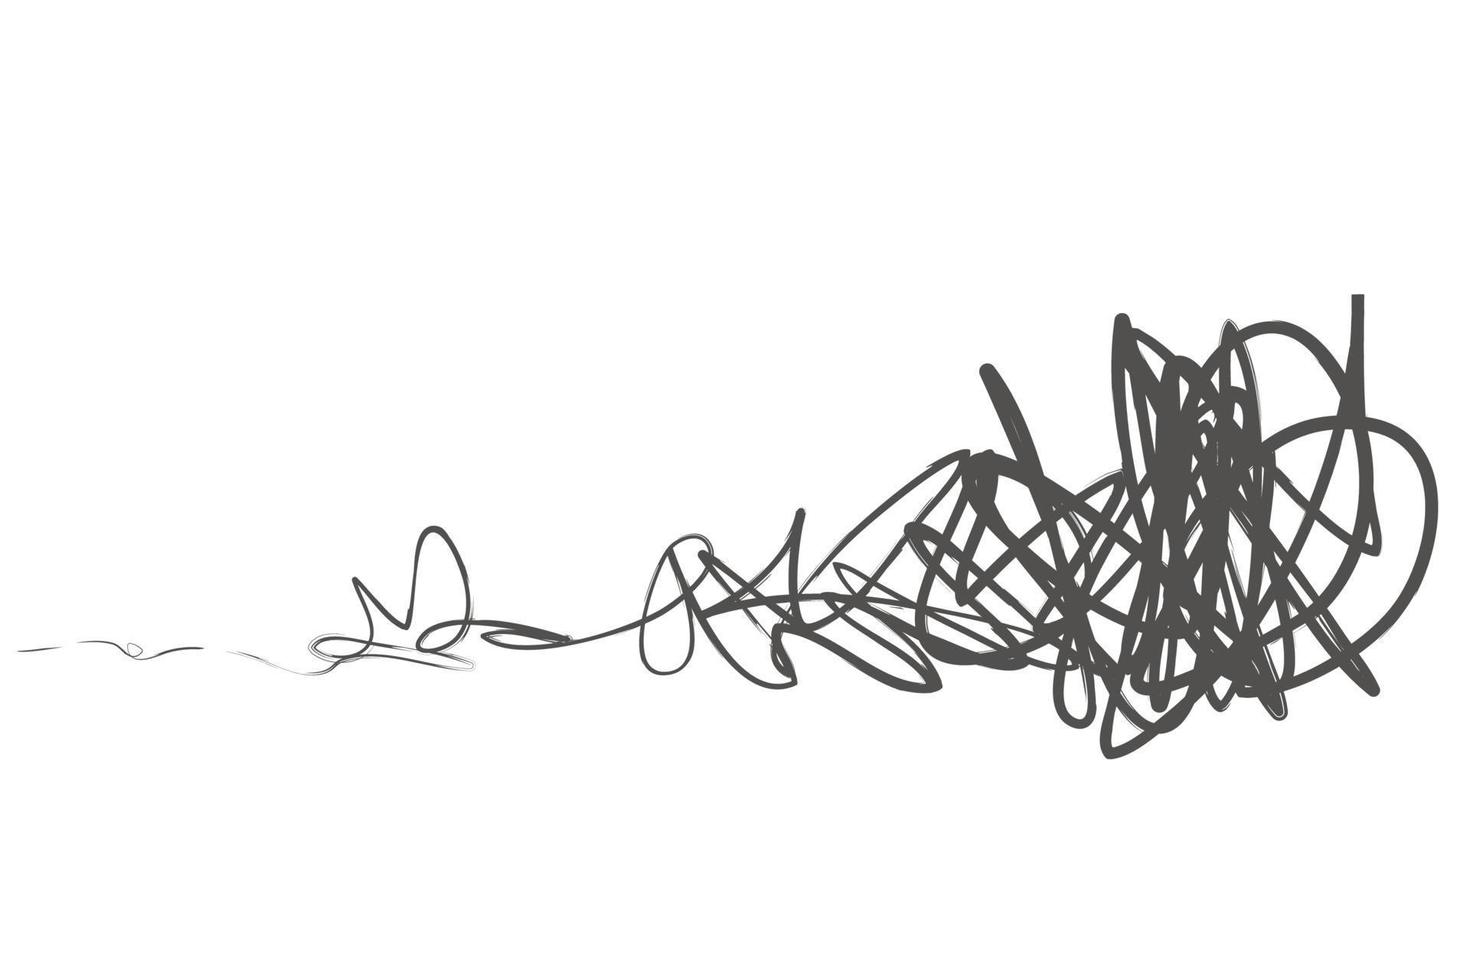 Tangled abstract scribble with hand drawn line. Doodle  vector drawn tangles, lines, circles. Black line abstract scribble shape. tangled chaos, depression, aggression, evil